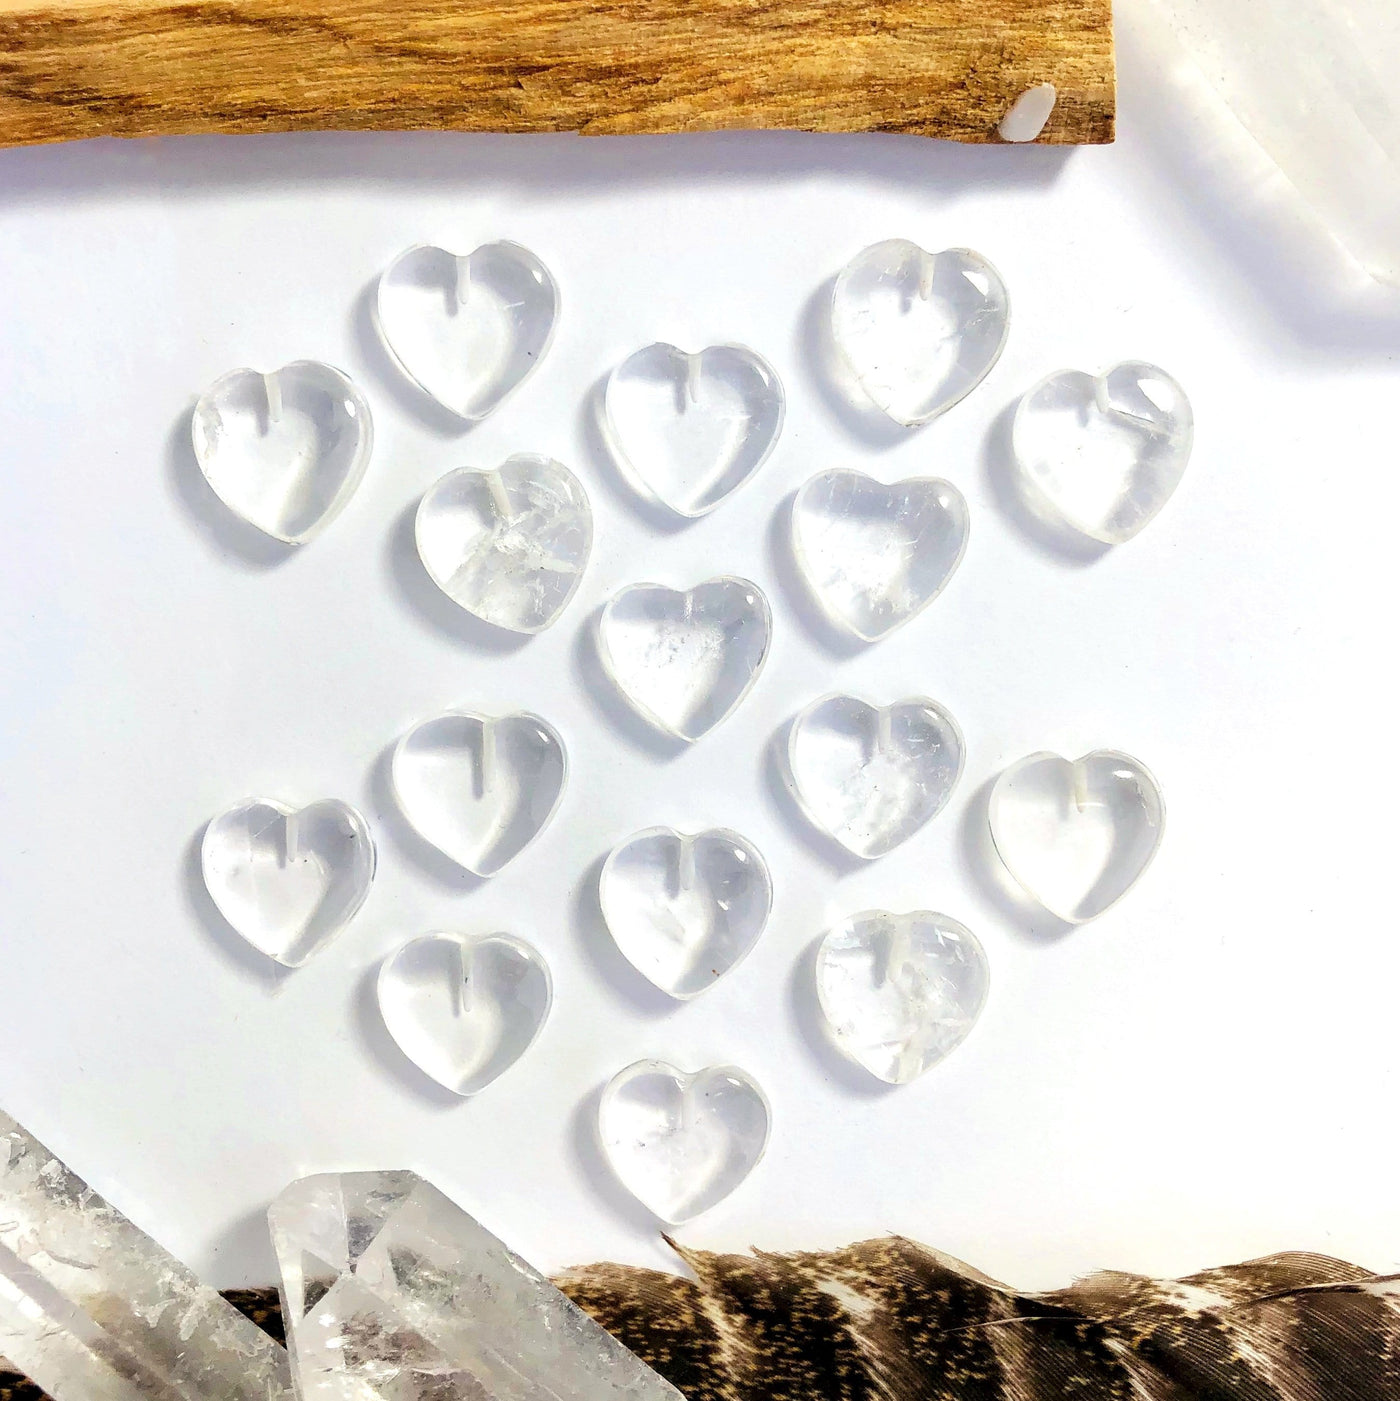 Multiple crystal quartz hearts displayed to show differences sizes and shades of quartz